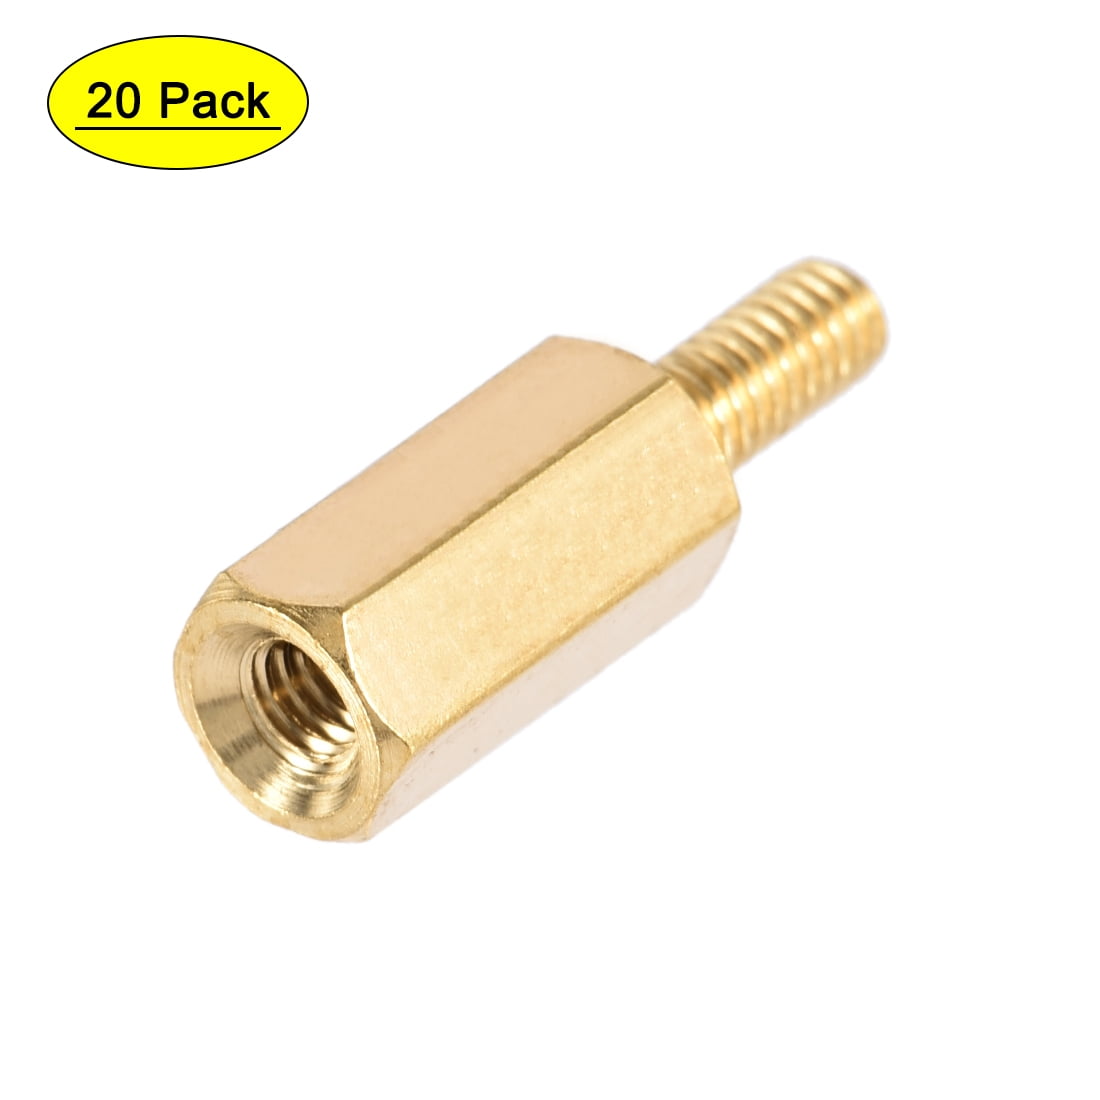 Uxcell Brass M2.5 9mm+6mm Male-Female Hex Standoff 20 Pack